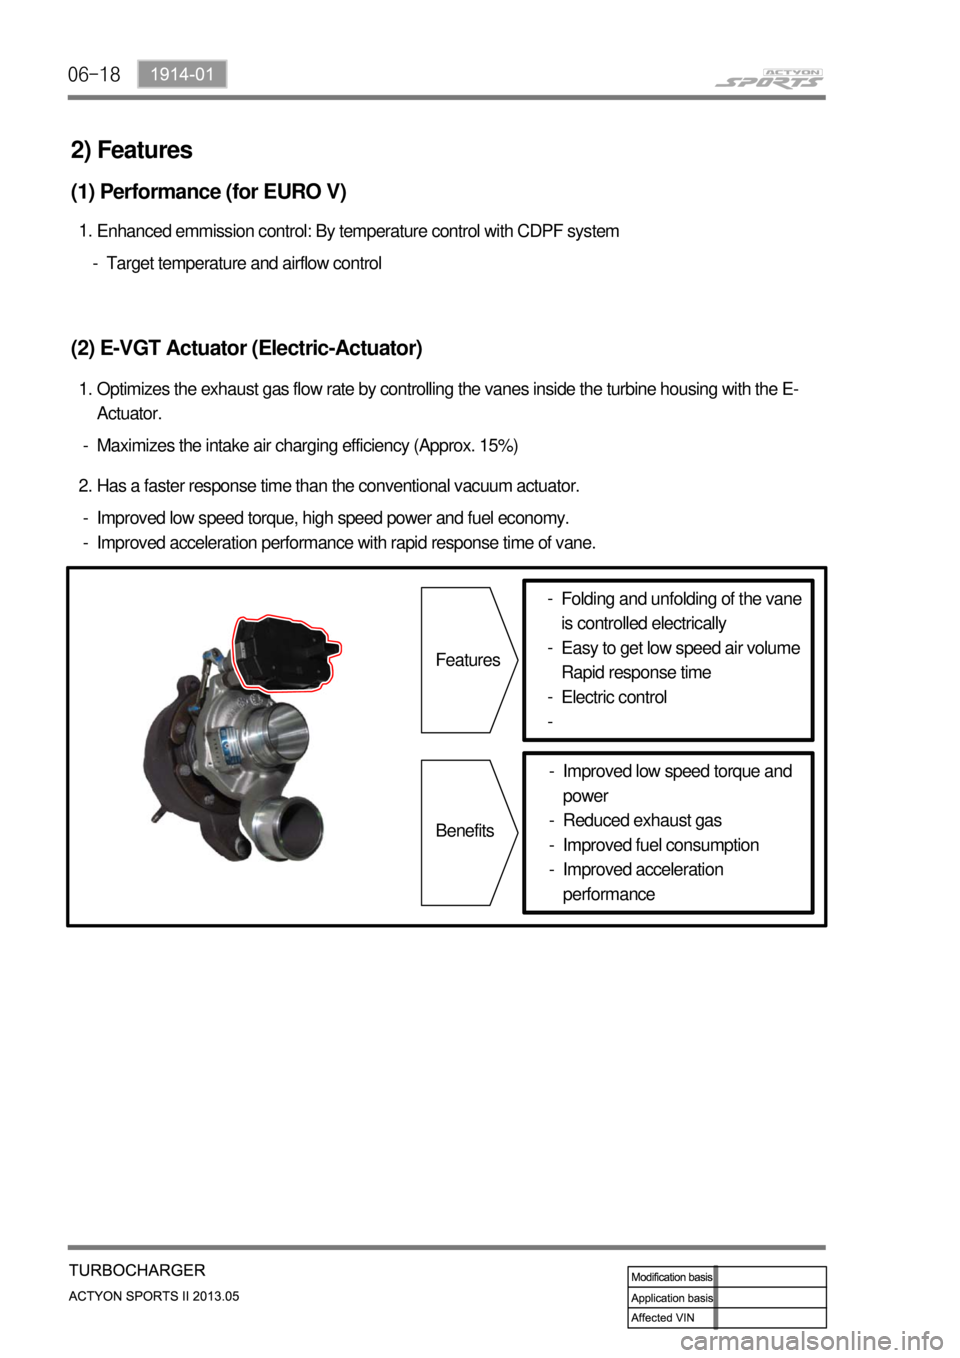 SSANGYONG NEW ACTYON SPORTS 2013 Owners Guide 06-18
Maximizes the intake air charging efficiency (Approx. 15%) -Optimizes the exhaust gas flow rate by controlling the vanes inside the turbine housing with the E-
Actuator. 1.
(2) E-VGT Actuator (E